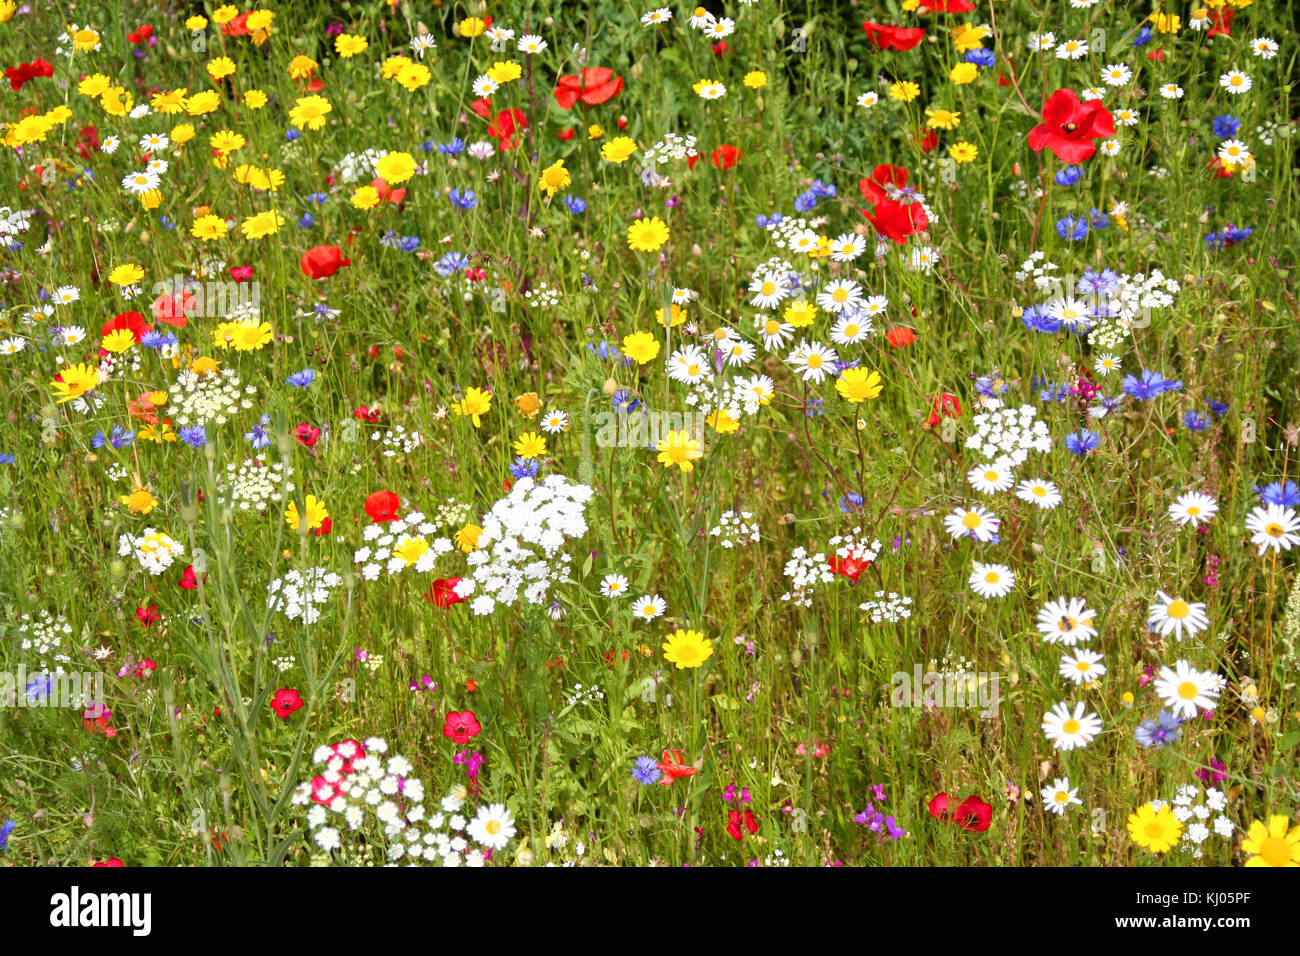 Meadow of Wild Flowers native to the British Isles. Stock Photo